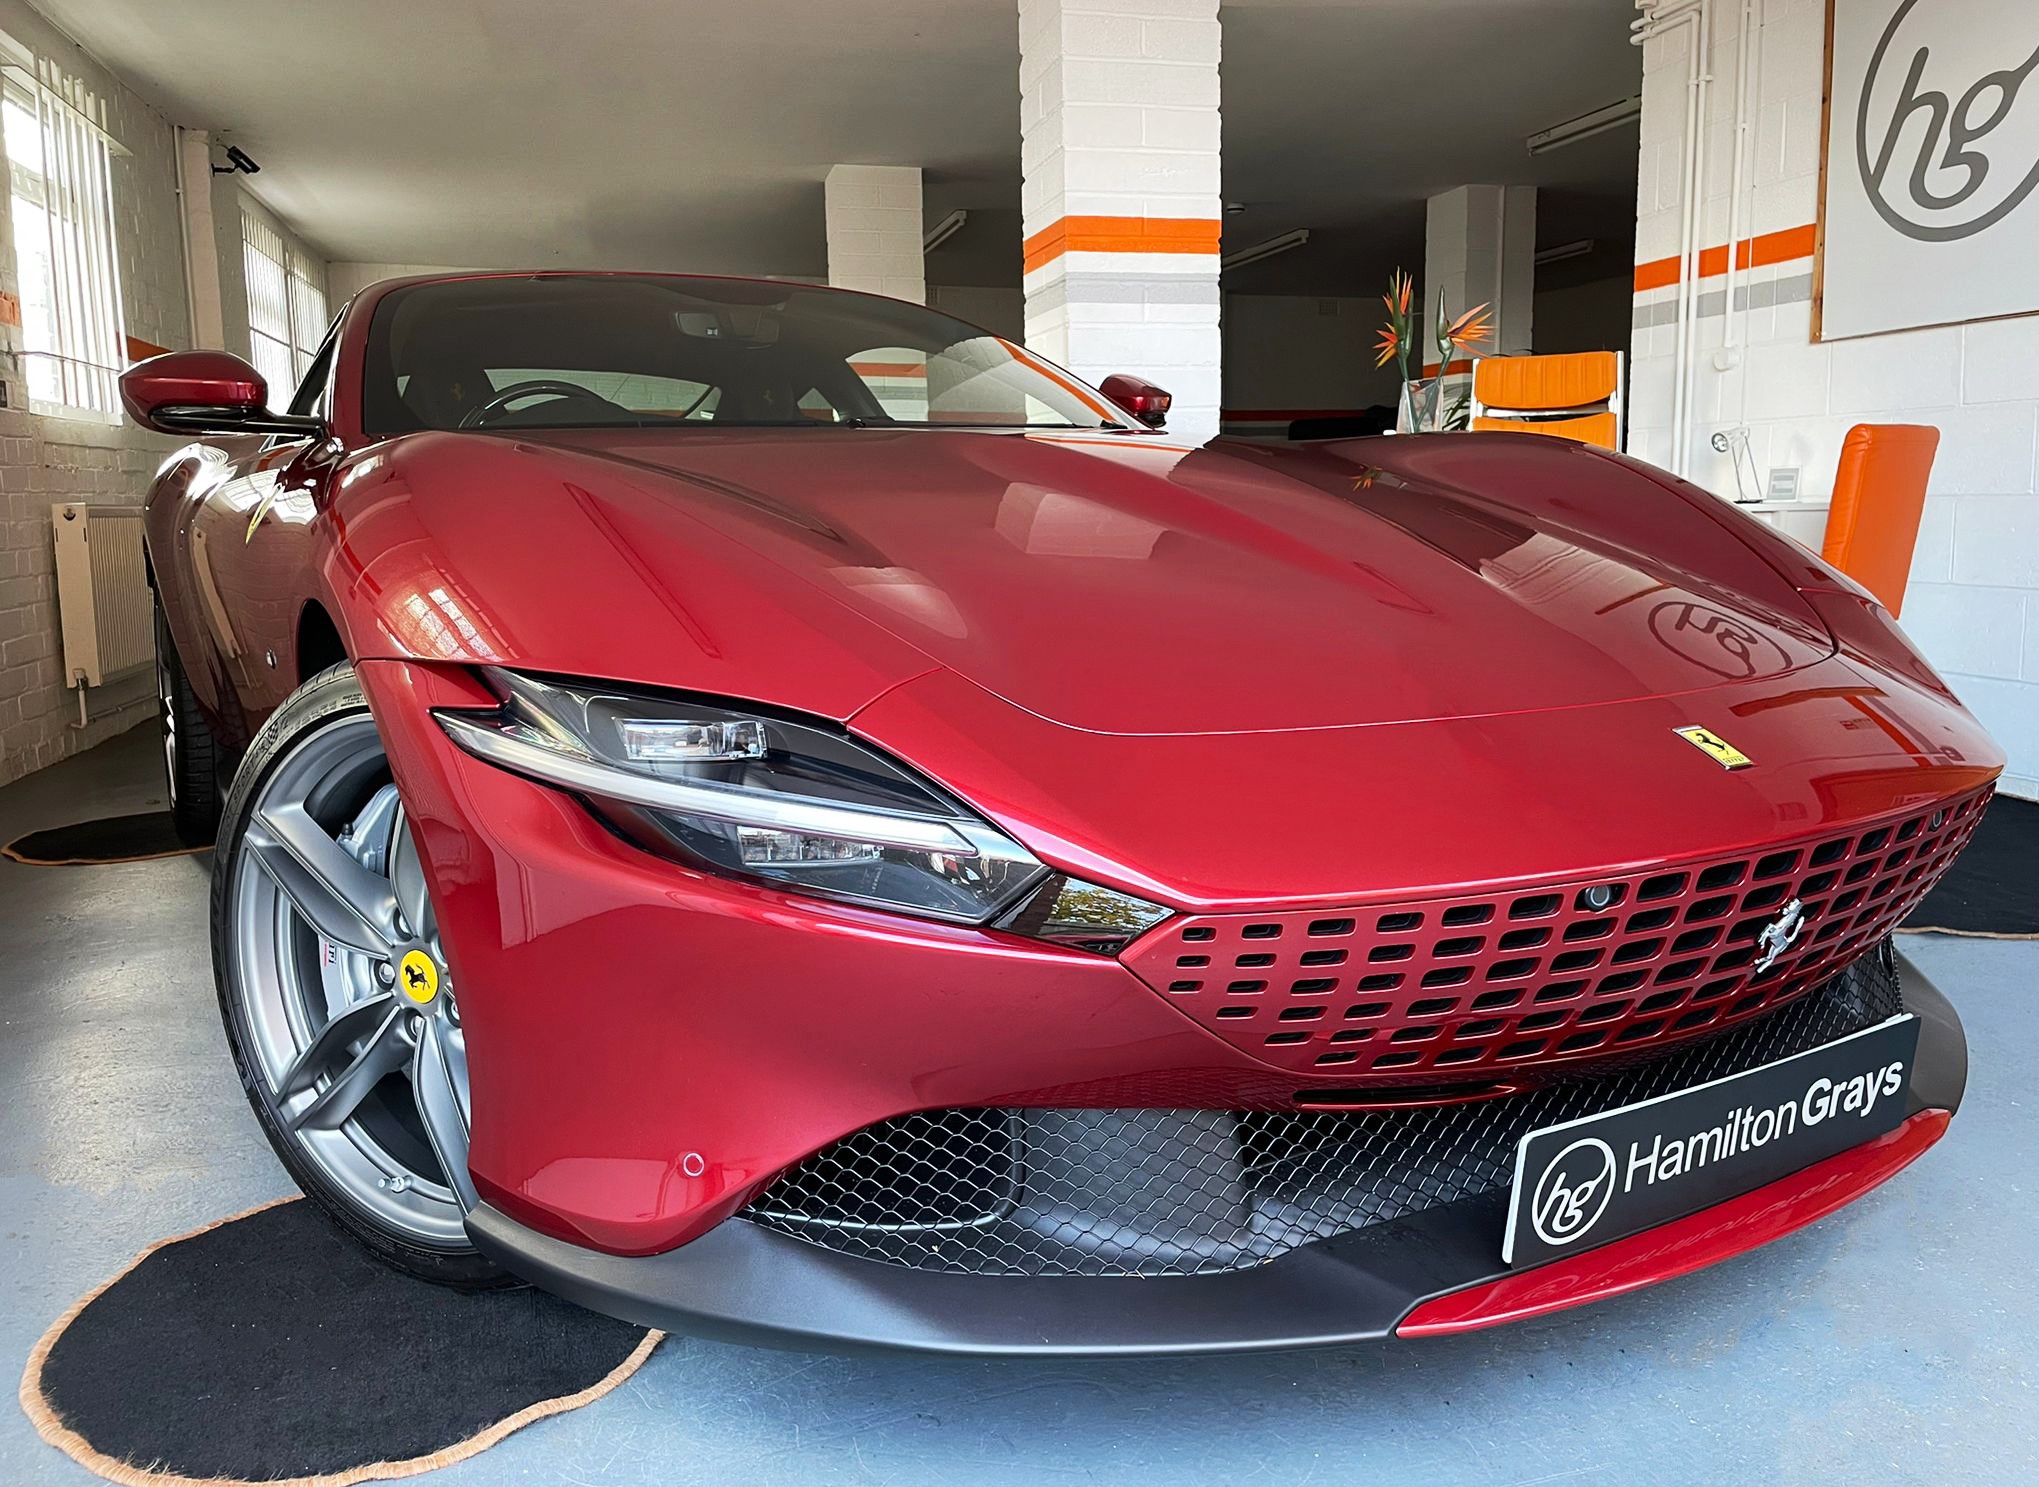 2021 (21) Ferrari Roma 3.9T V8 F1 DCT. In Rosso Fiorano Metallic with Nero Hide. £27k+ Options. July Car.. Delivery mls. ‘VAT Q’.. As New.. (SOLD)